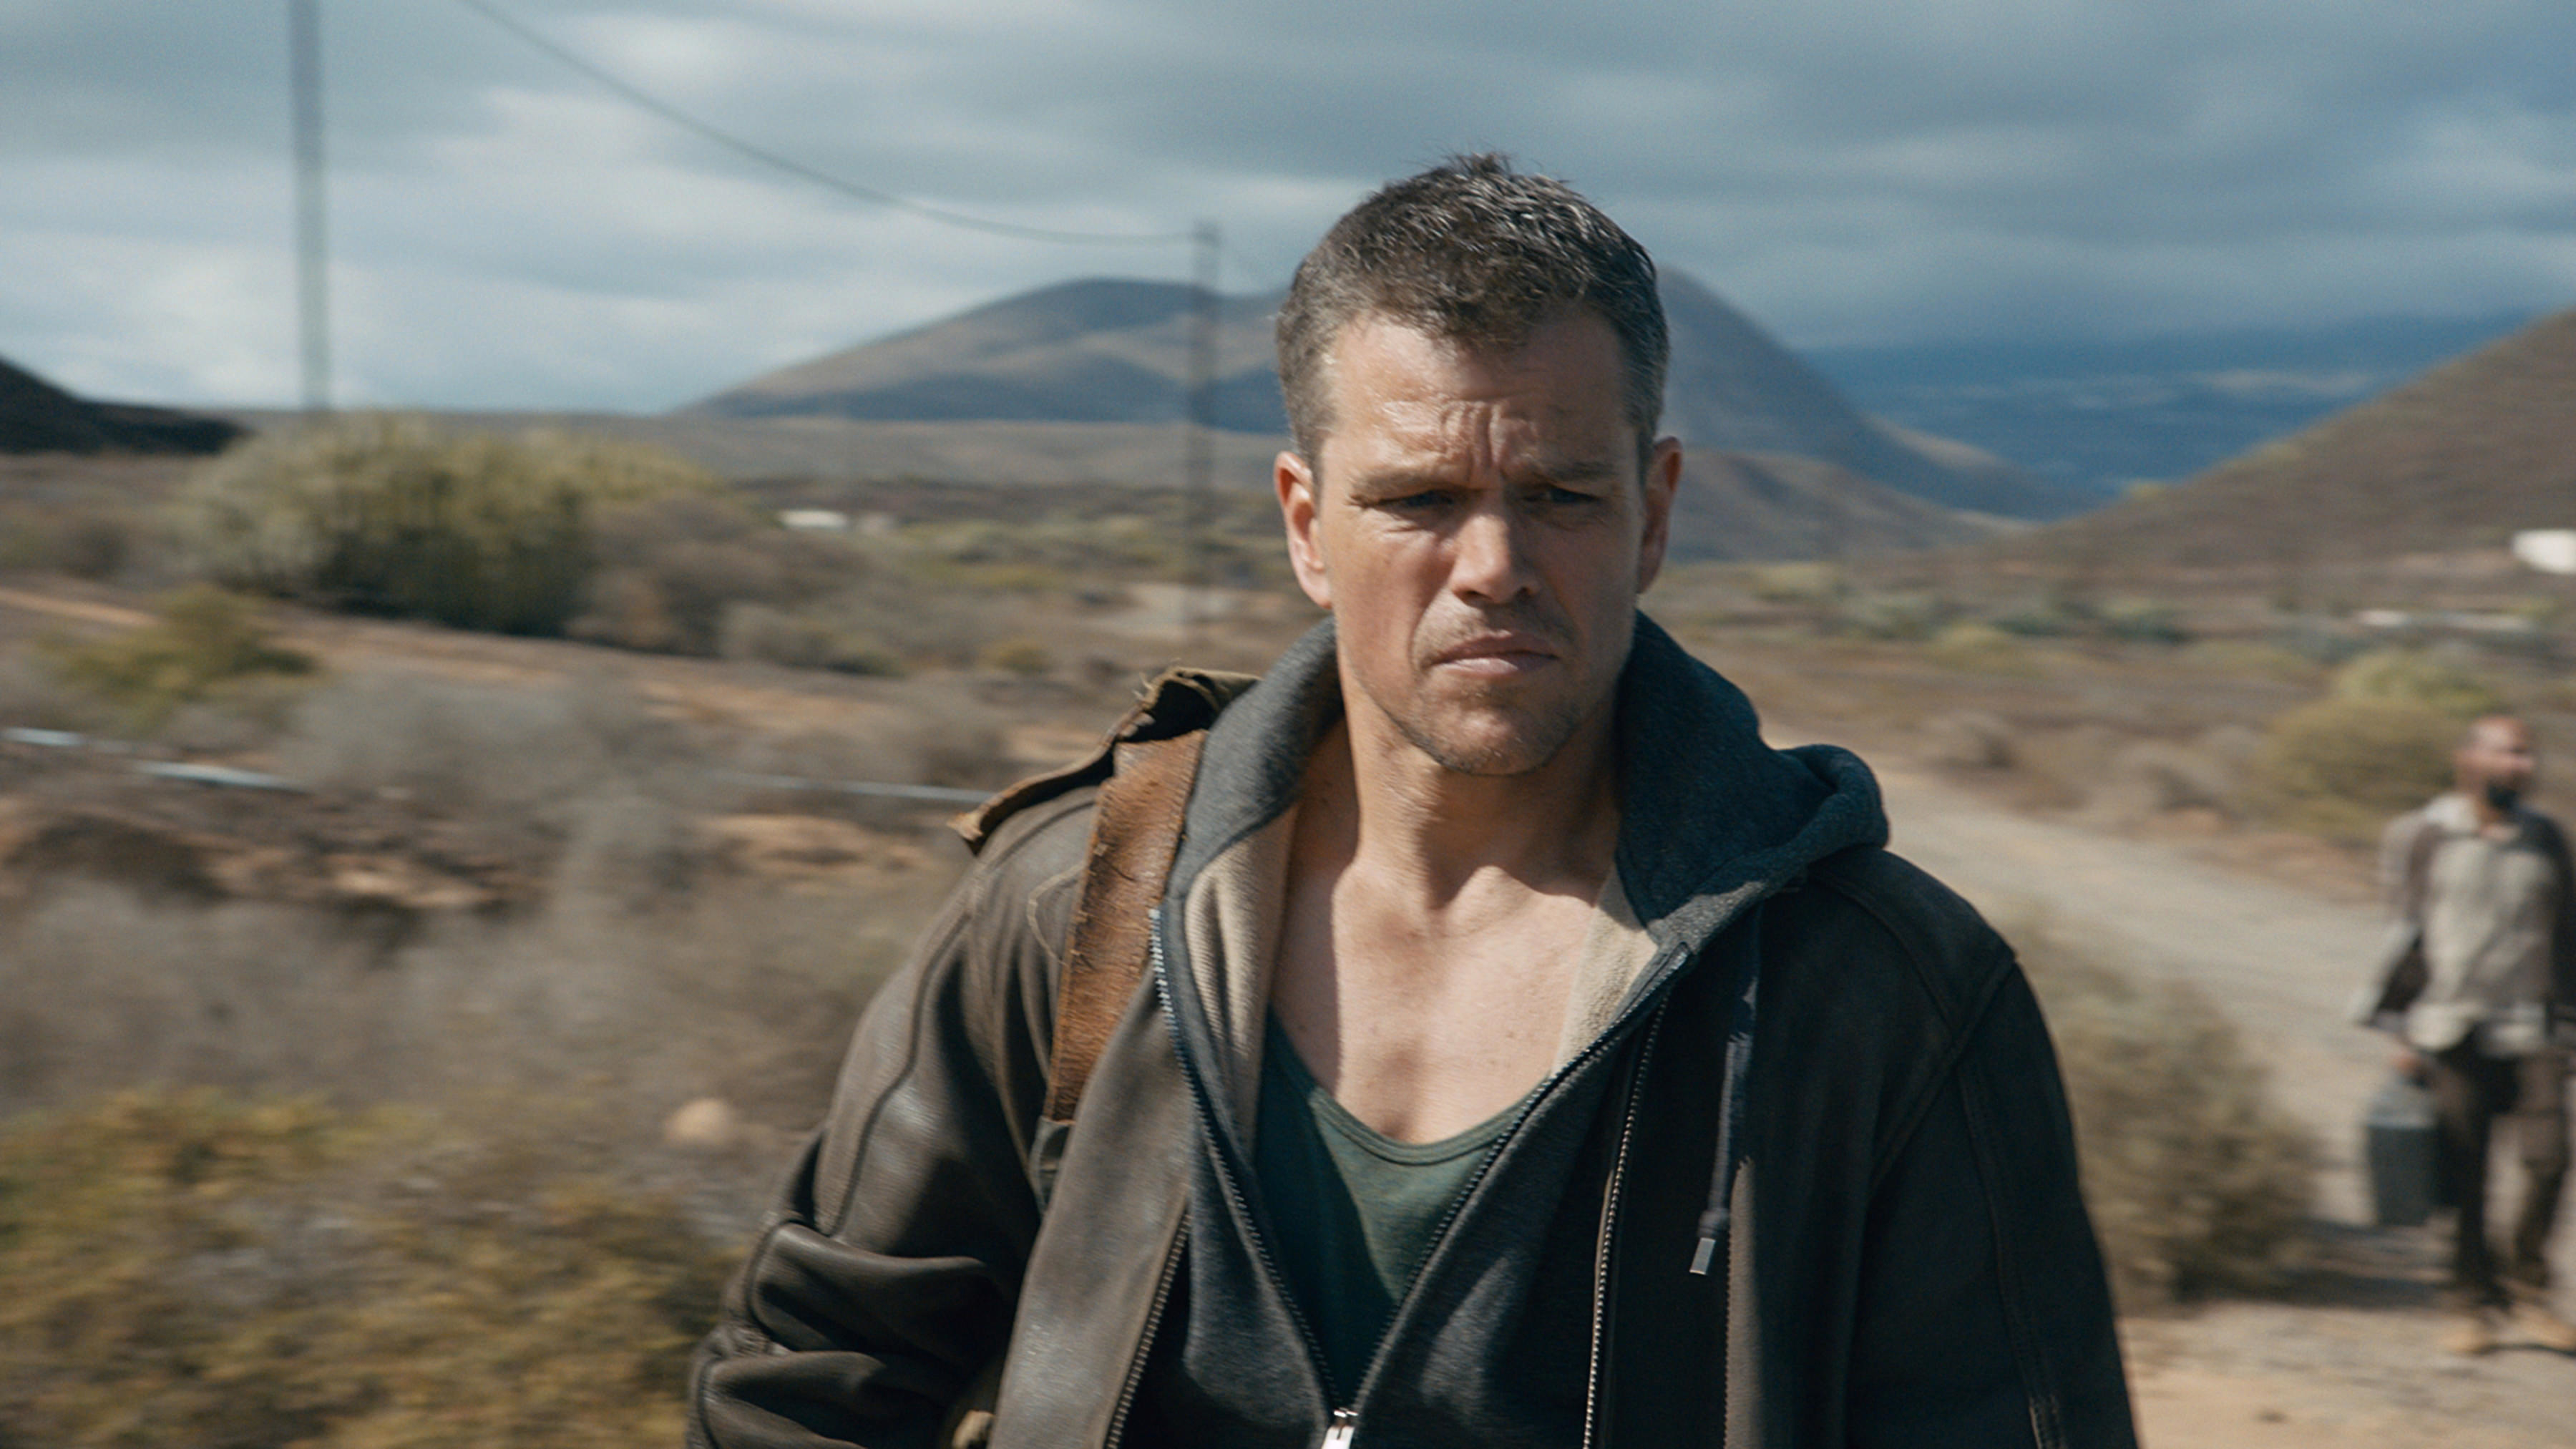 Close-up of Matt in a jacket amid a rugged outdoor scene